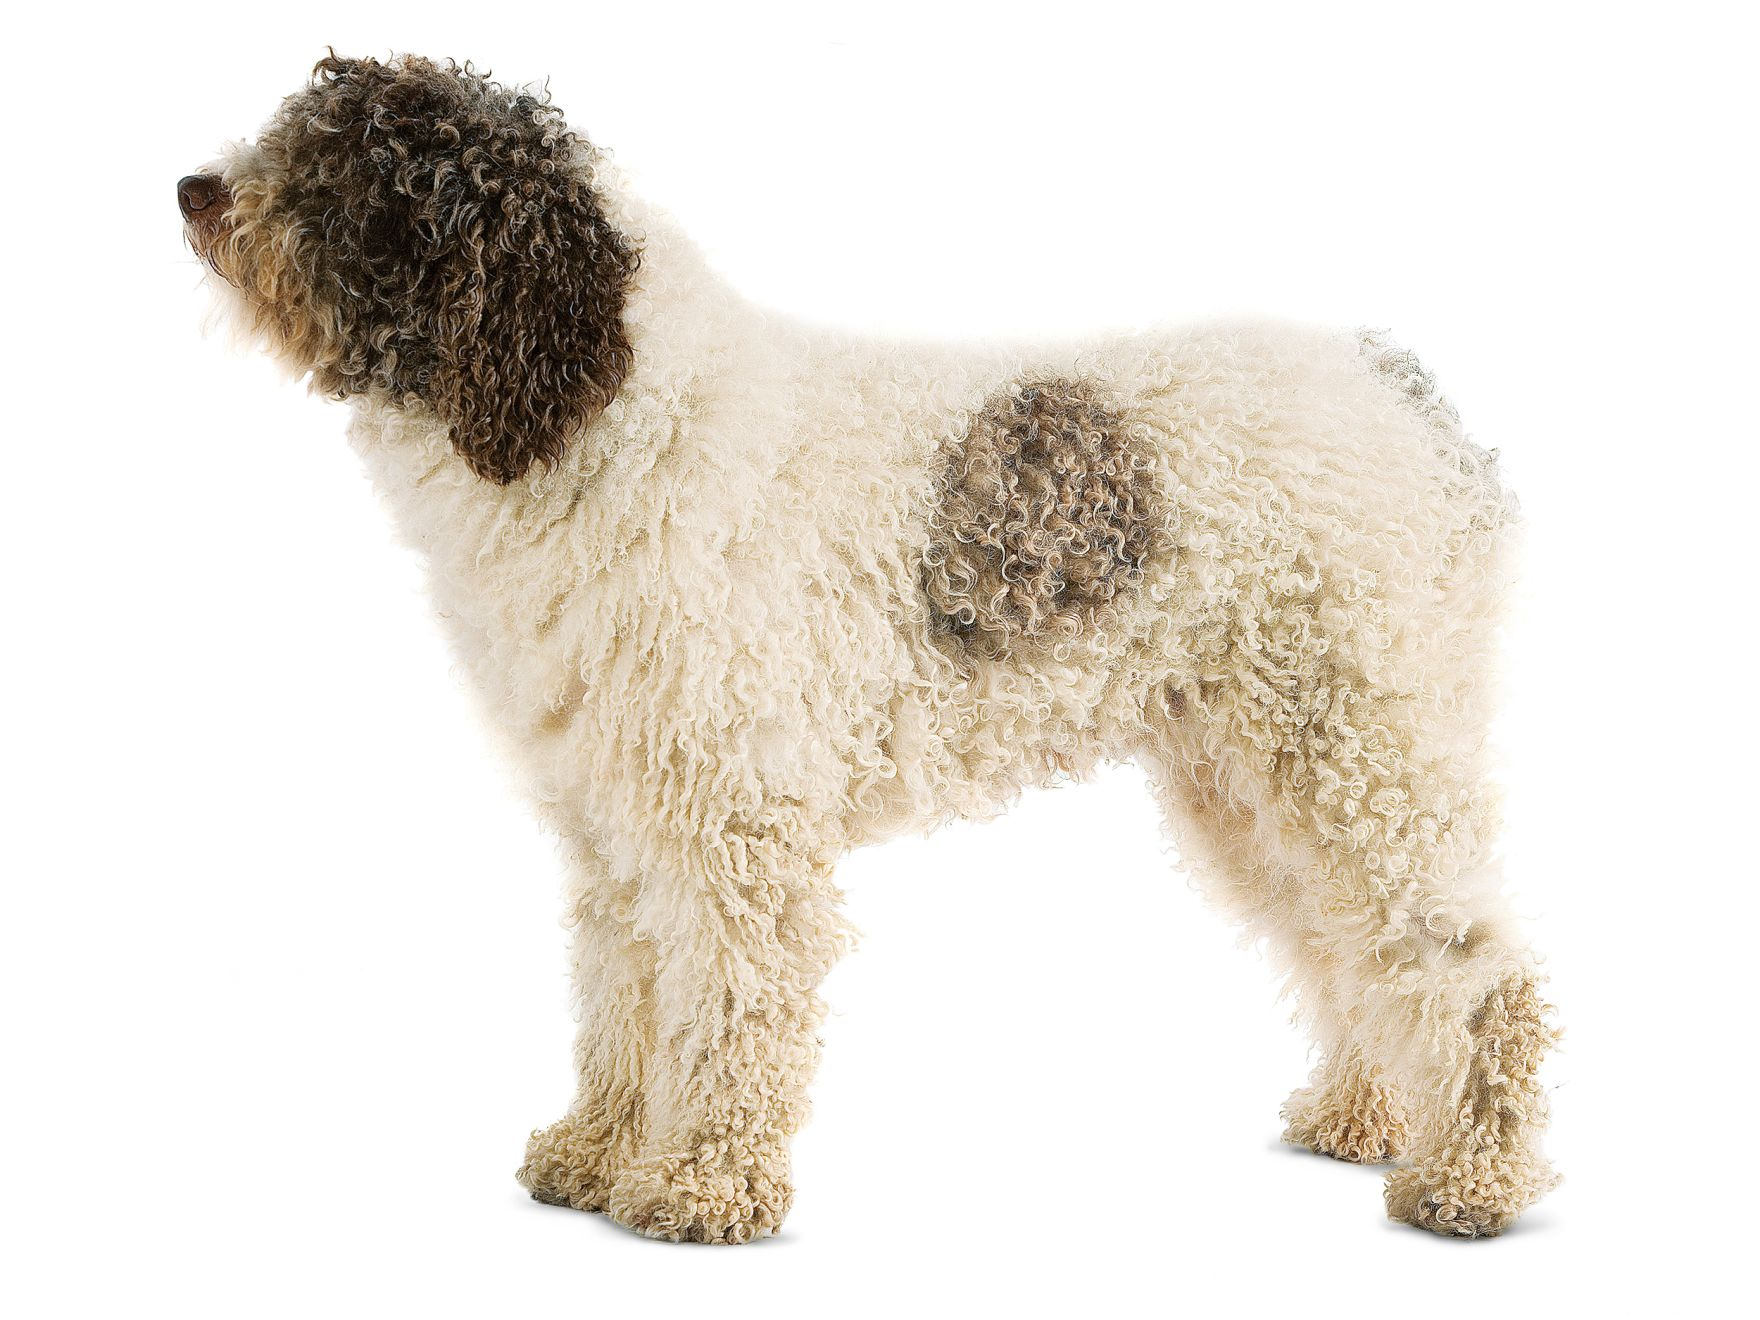 Spanish Water Dog adult in black and white